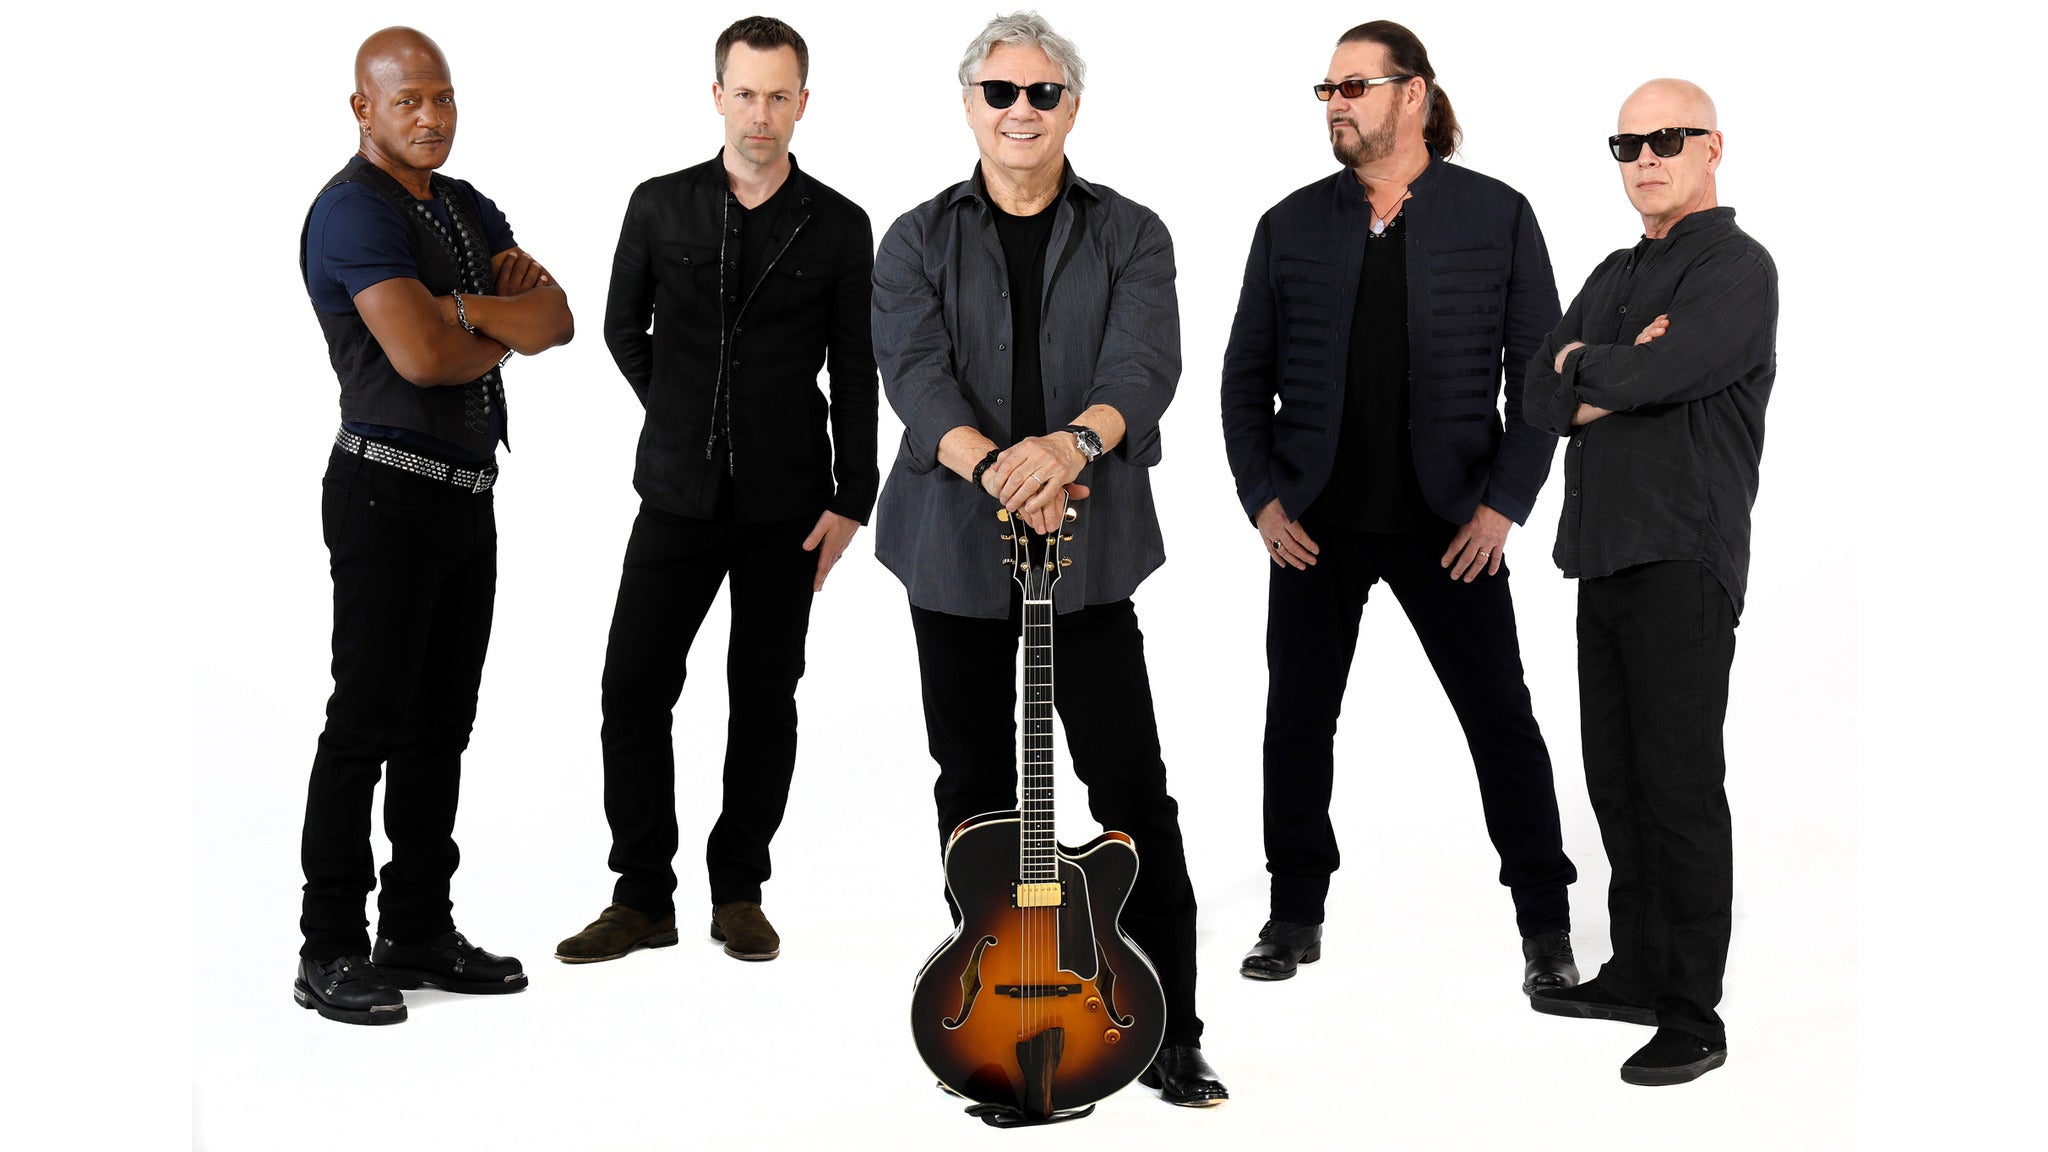 accurate presale code to Steve Miller Band presale tickets in Wantagh